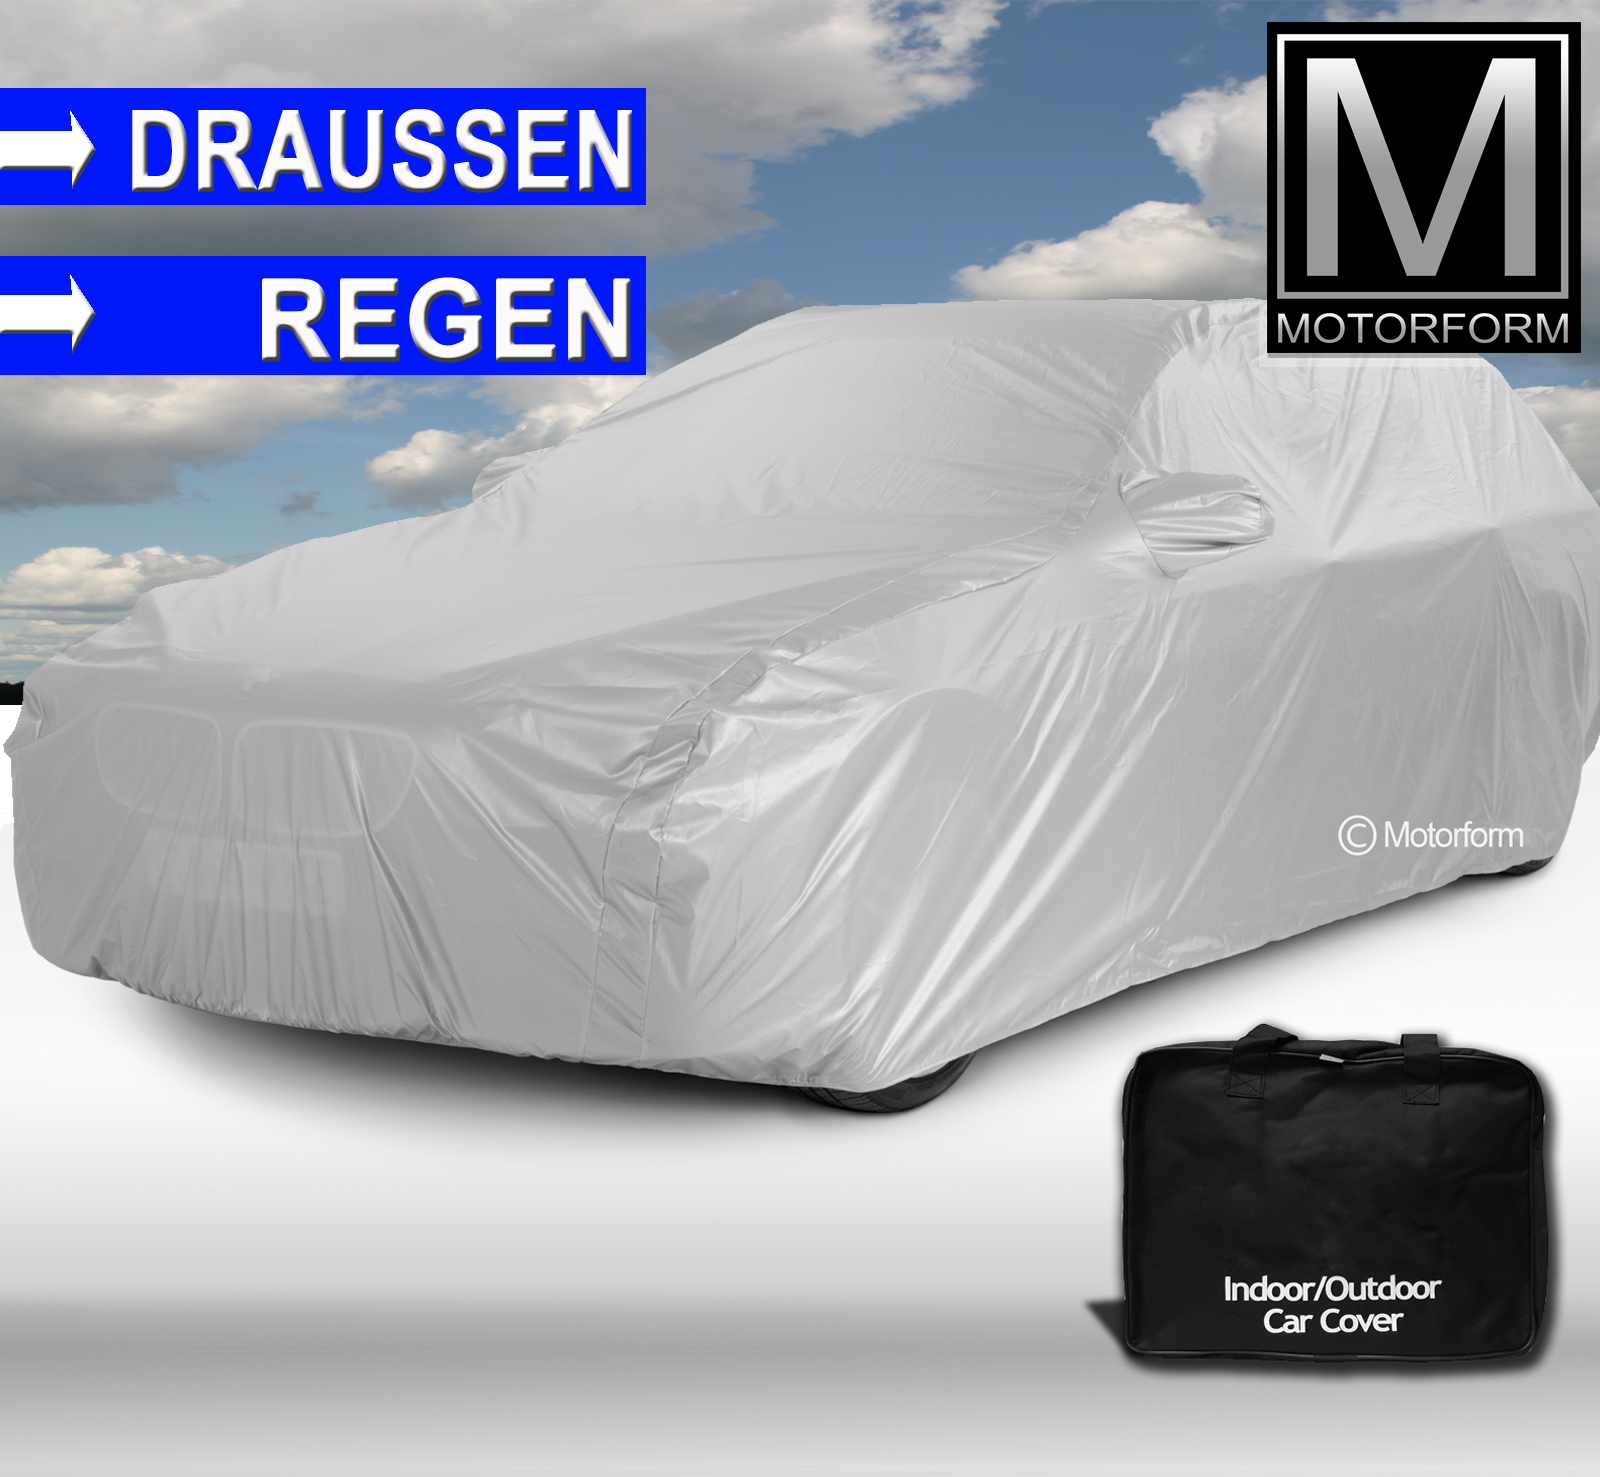 Voyager Outdoor Car Cover for Opel Omega A Estate